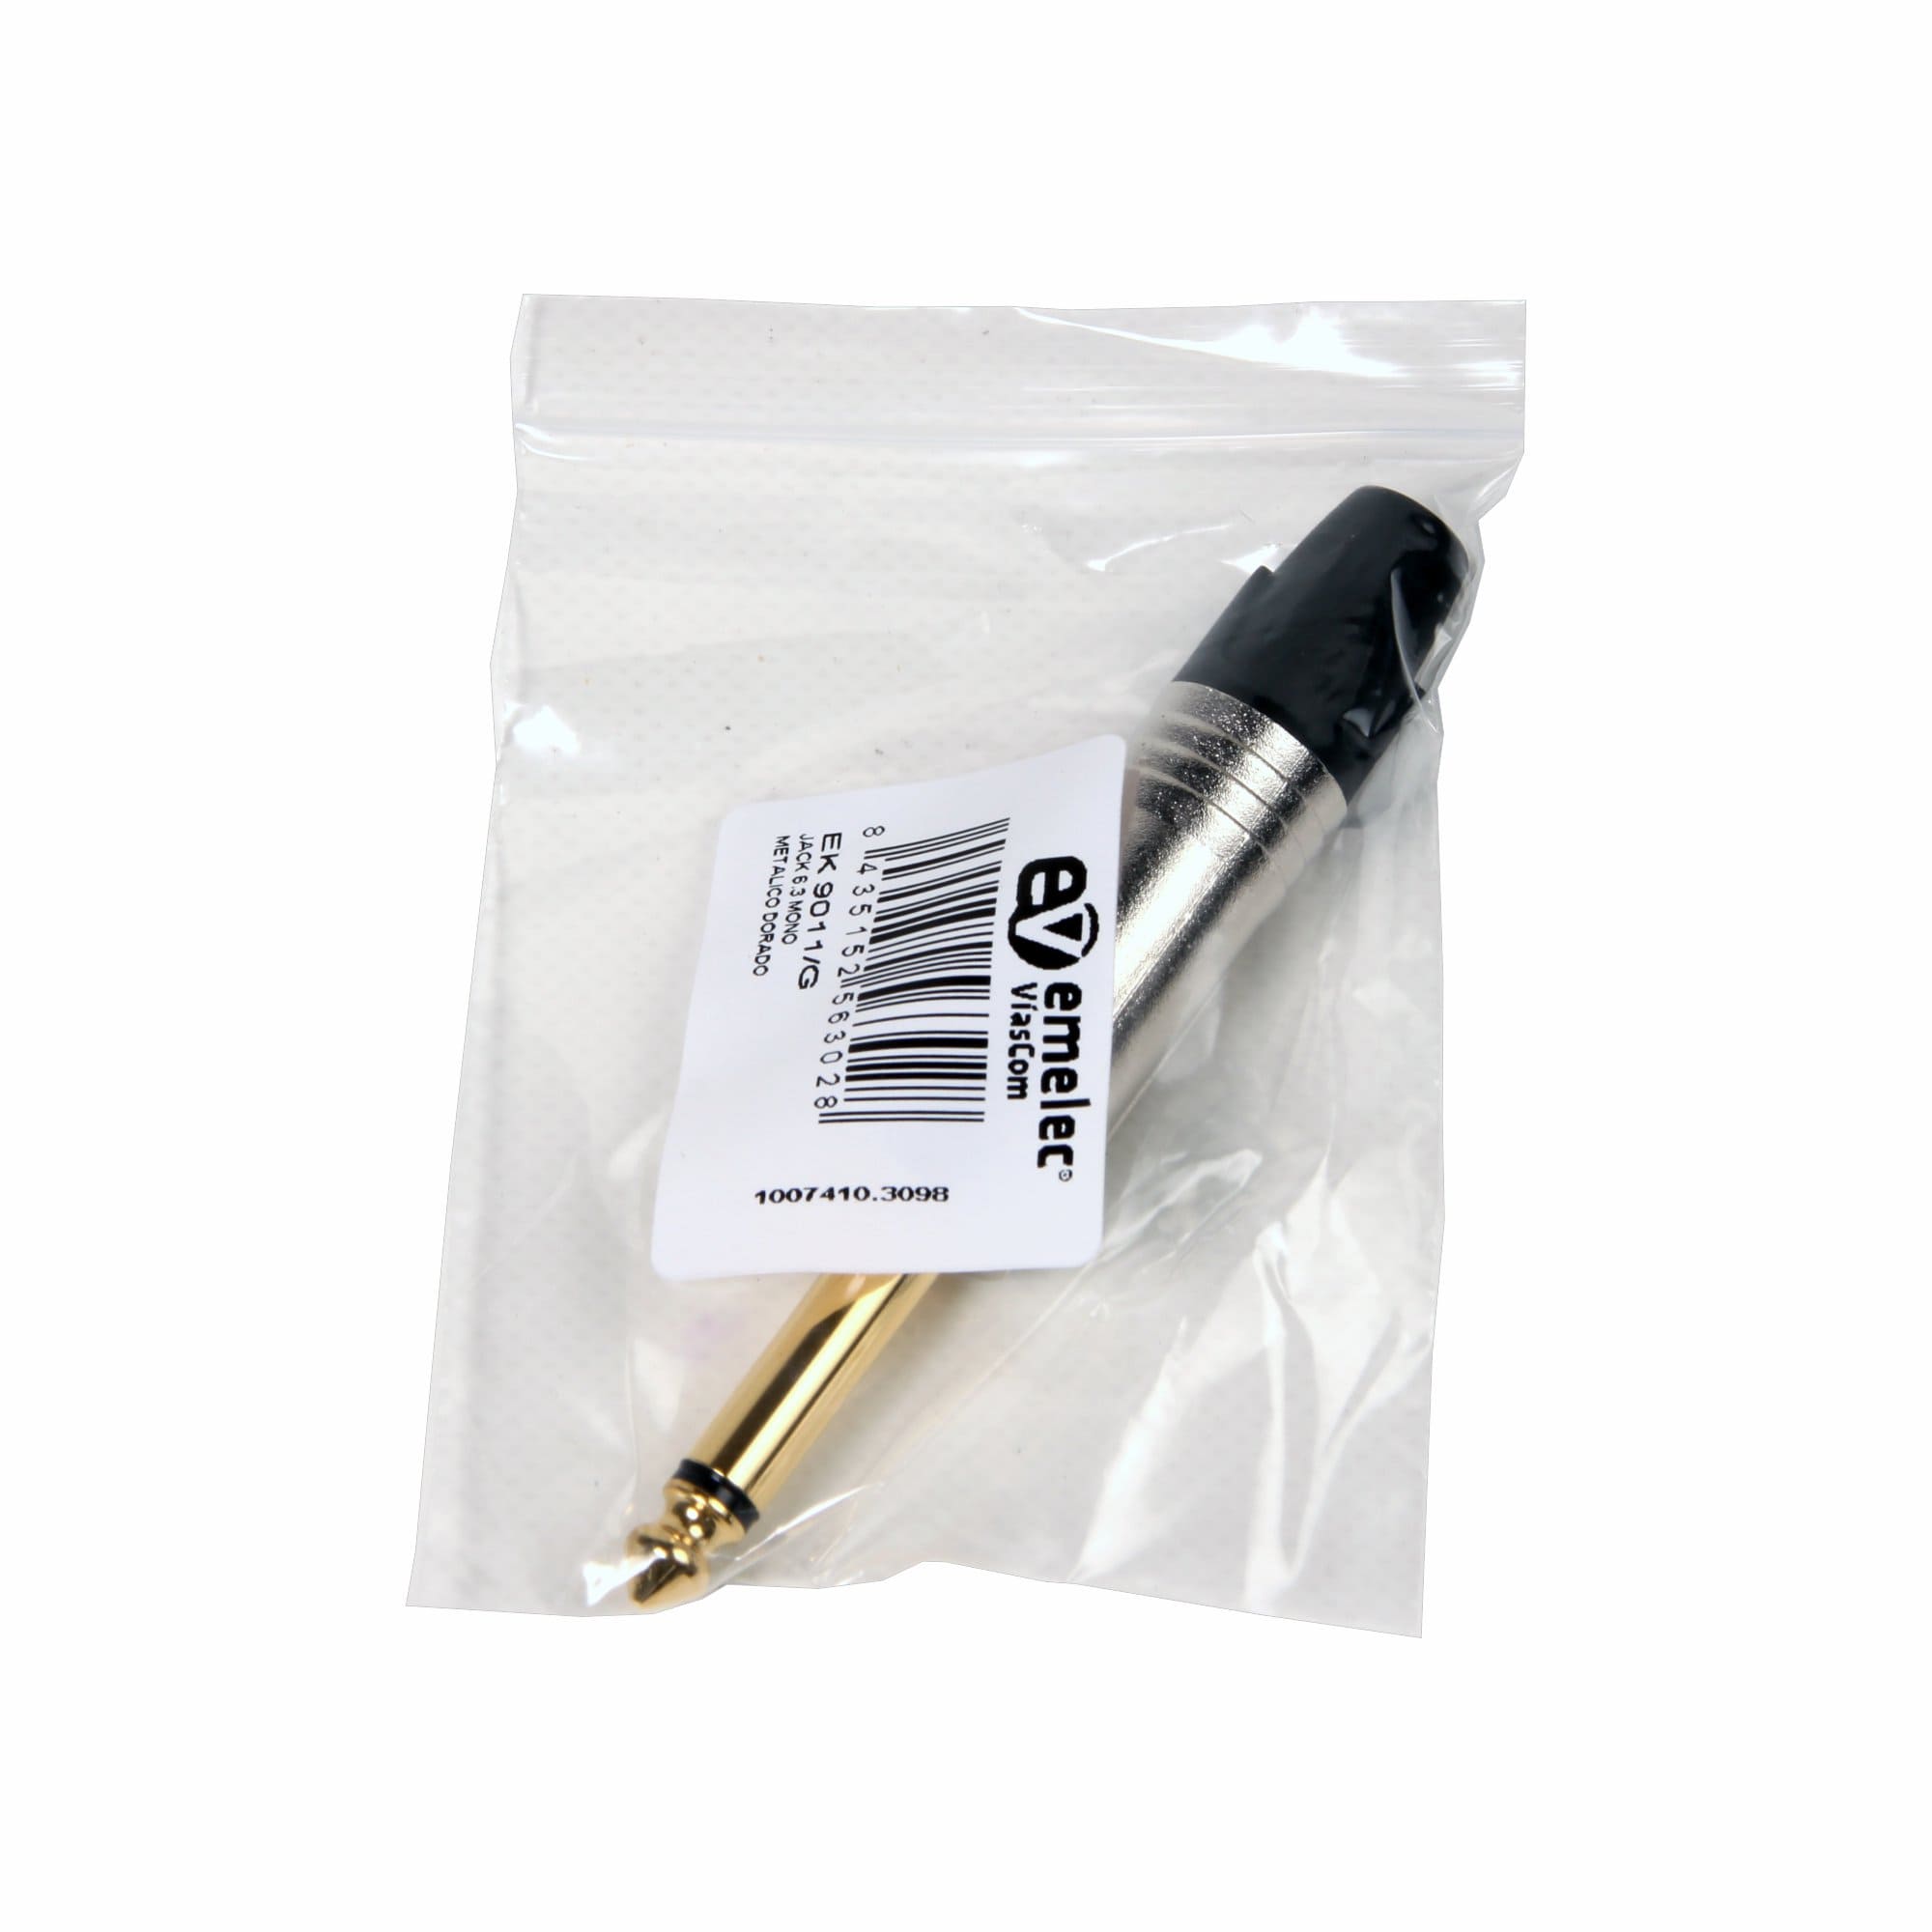 Individual plastic bag with connector Jack 6.3 Male mono gold-plated male of Emelec ViasCom